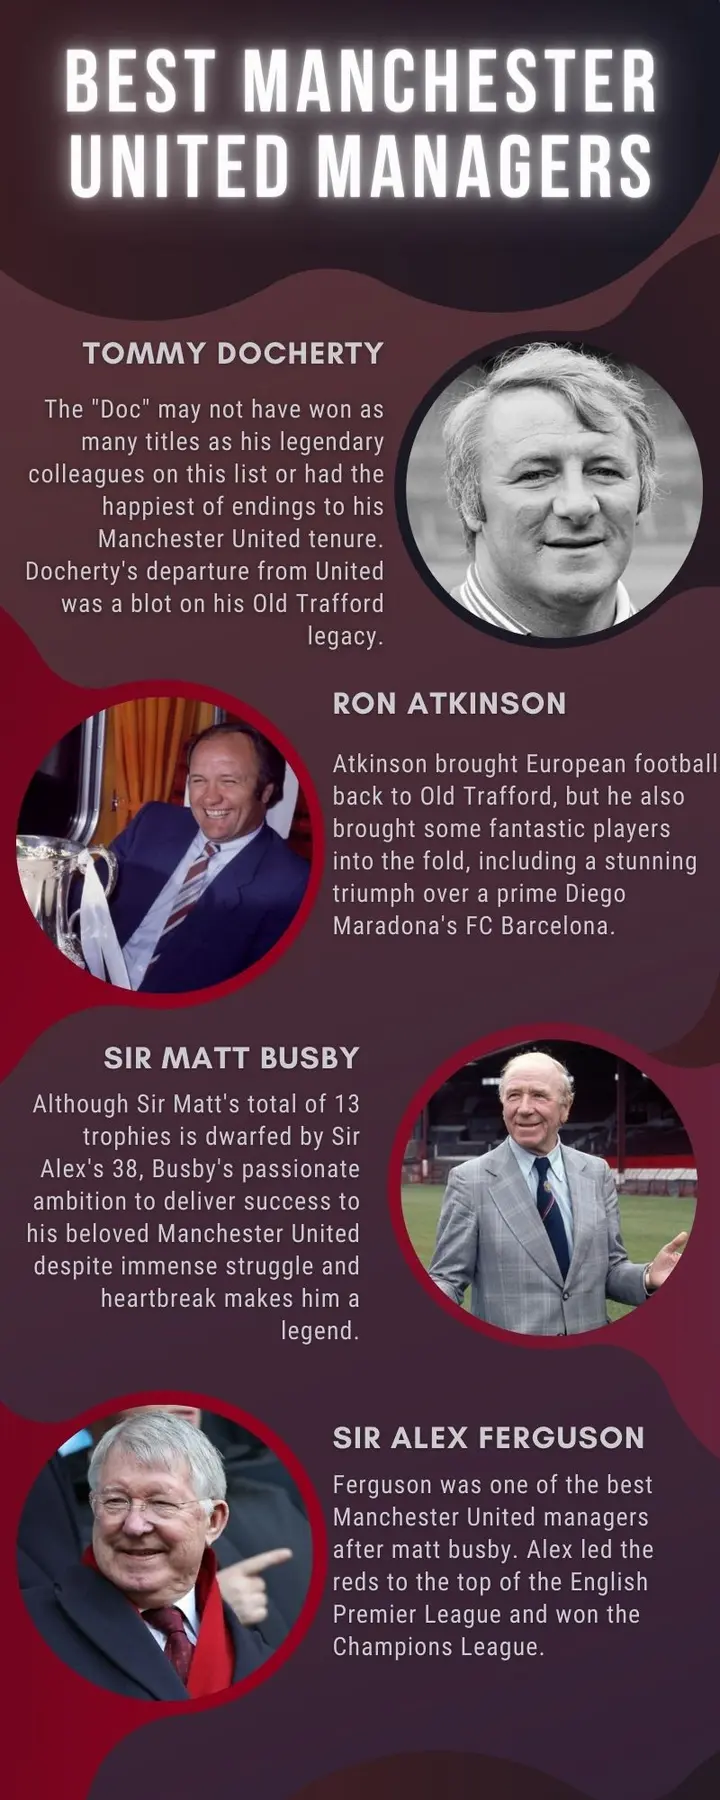 Top Manchester United managers of all time